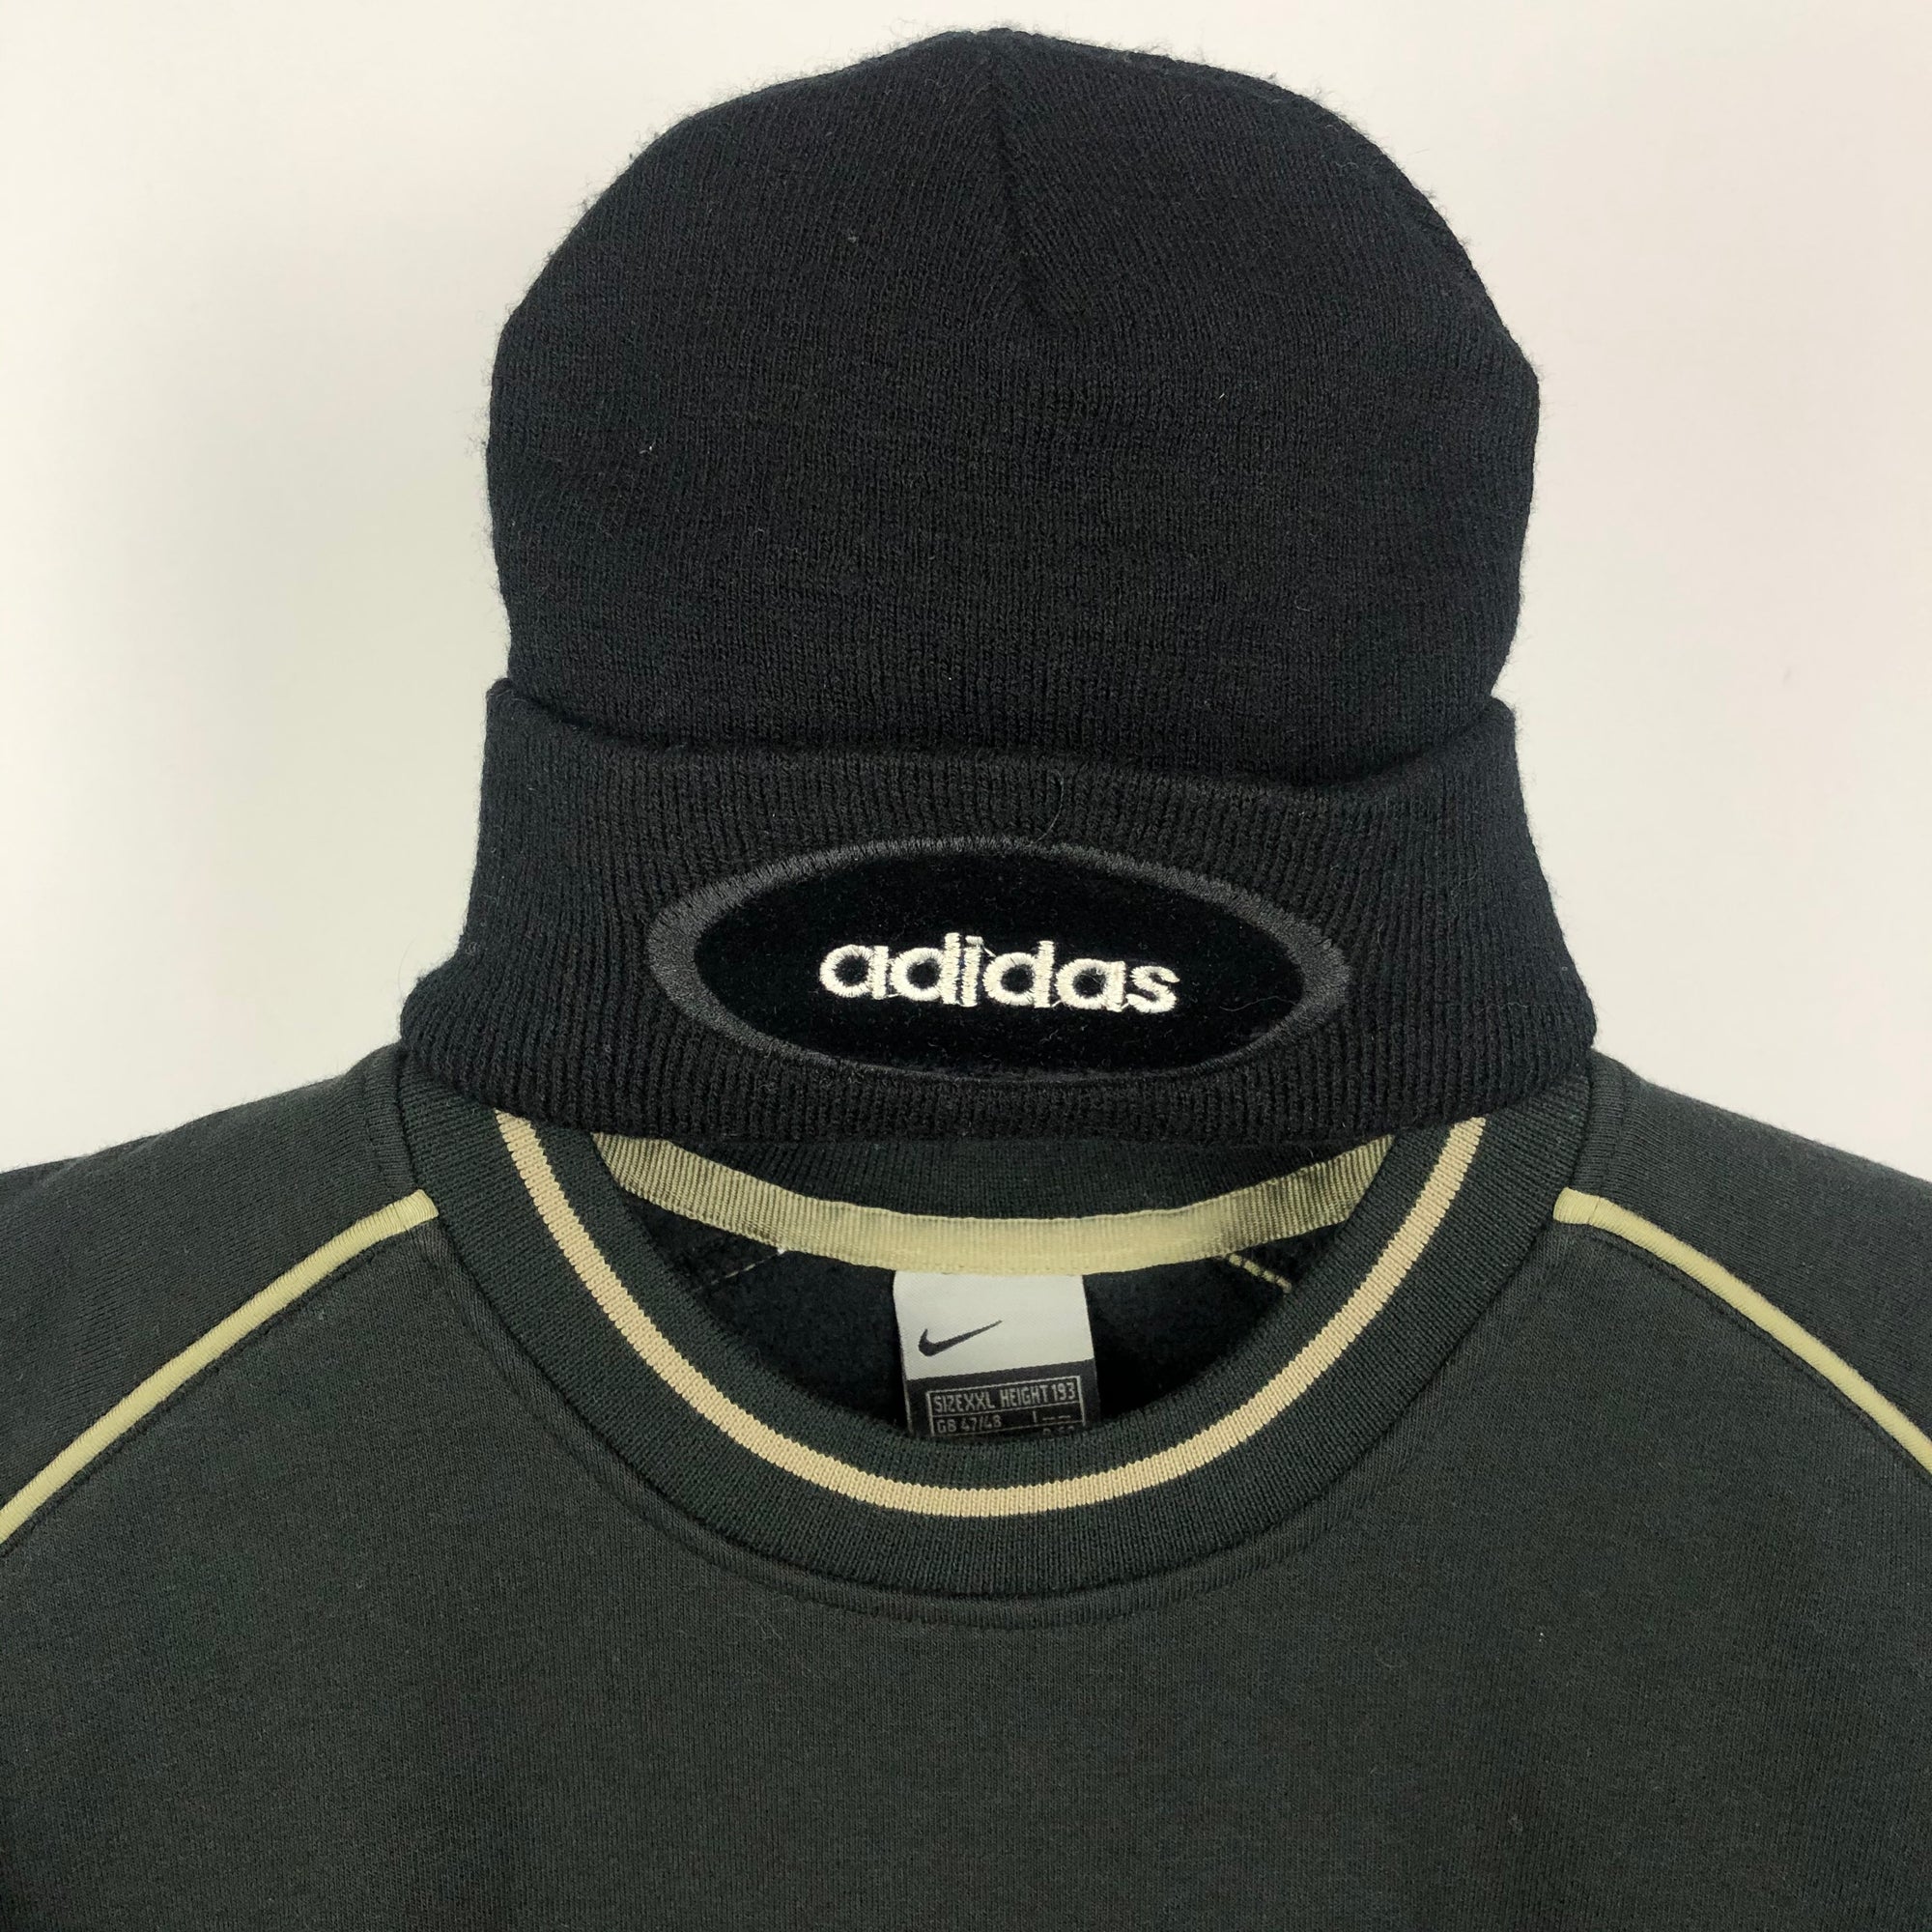 Vintage Adidas Spellout Beanie Hat in Black